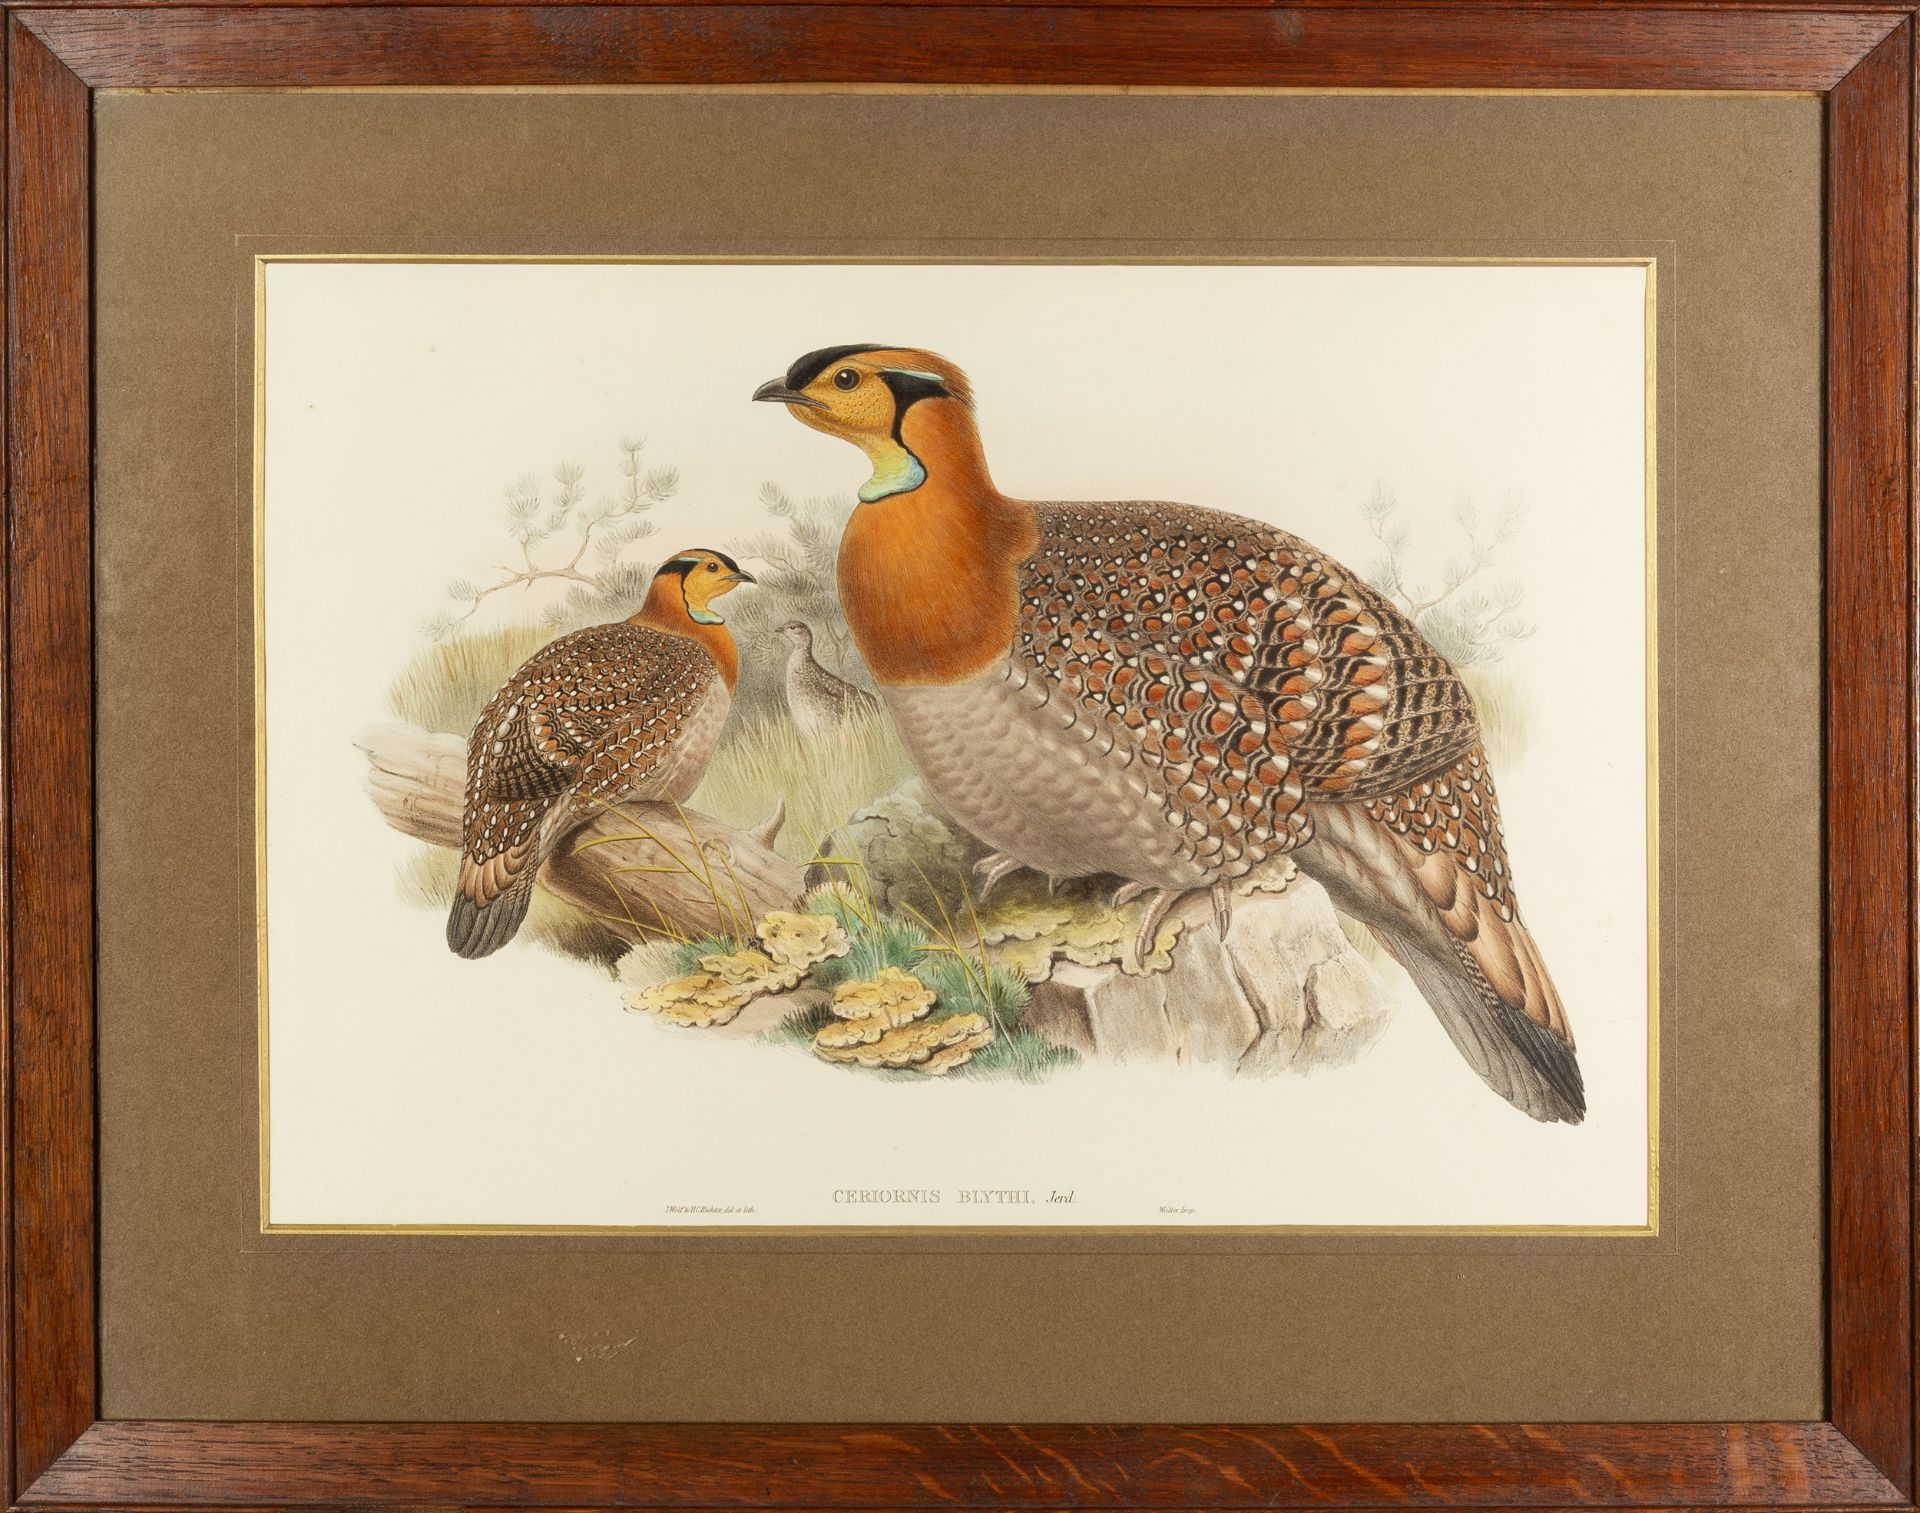 After John Gould (1804-1881) Calcophasis and Phasianus Reevesh, Lithographs together with - Image 5 of 5